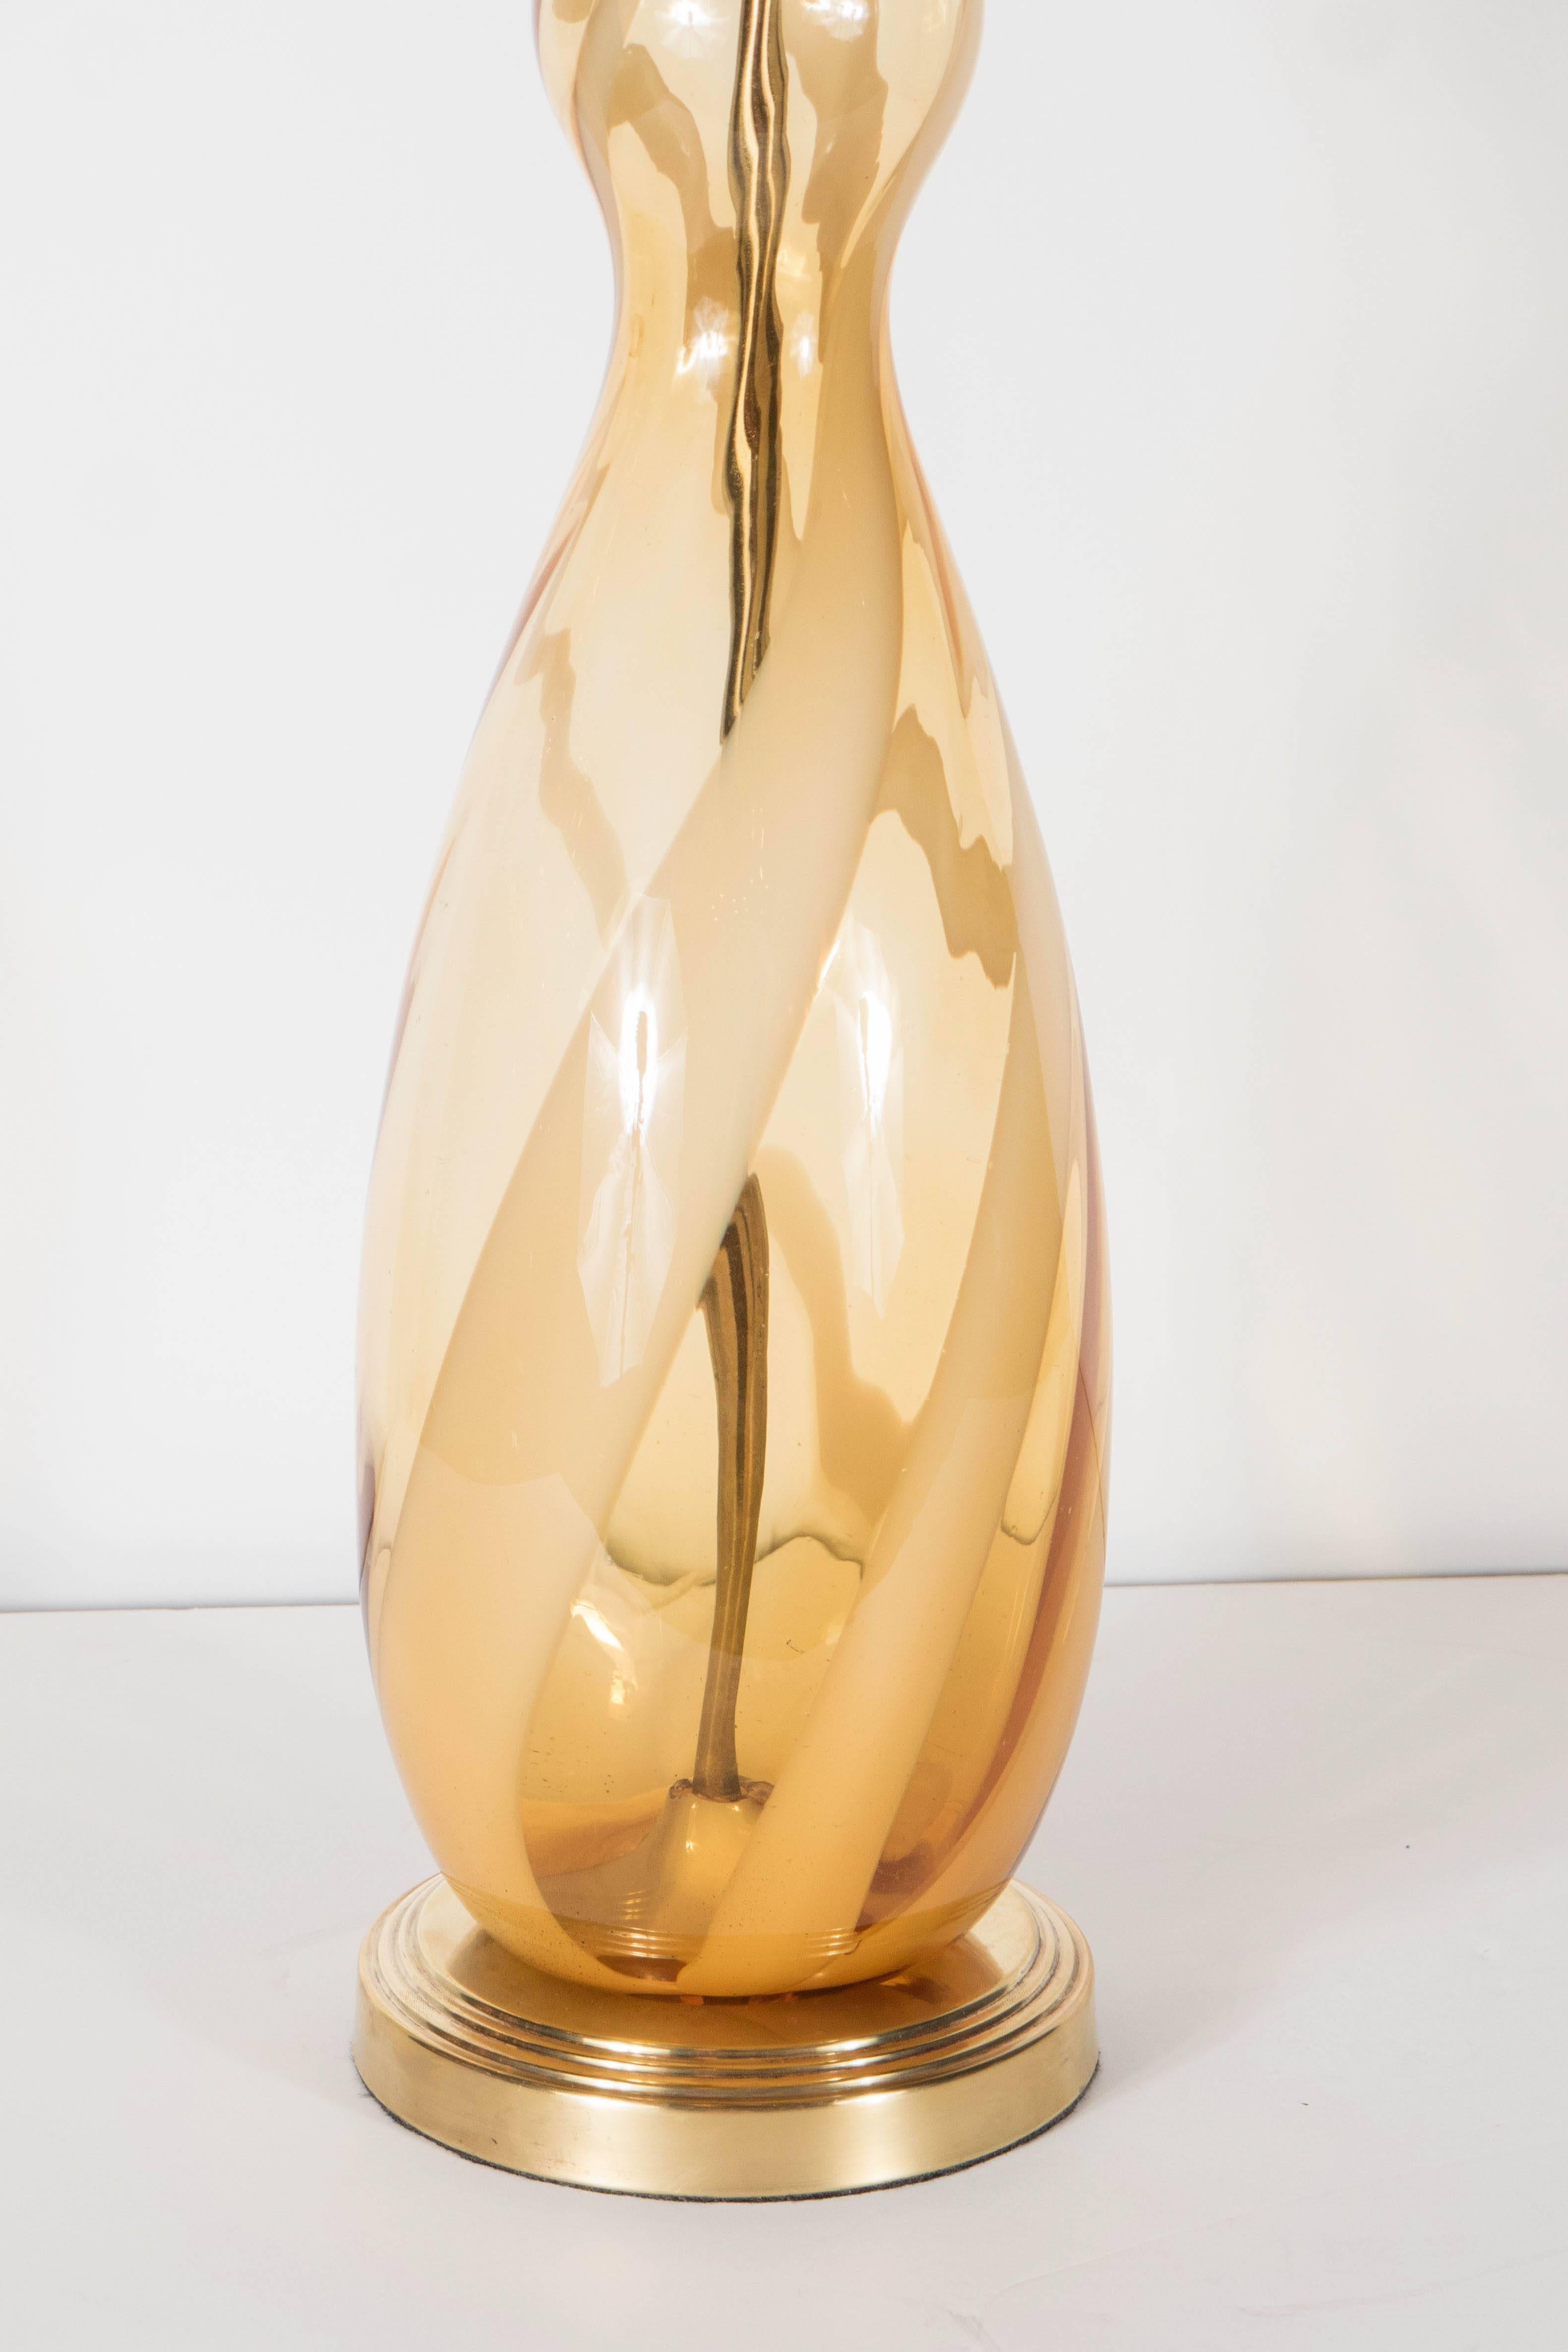 Mid-Century Modernist table lamp comprised of hand-blown Murano glass in a balustrade form shape. This lamp is featured in a dark, smoked Amber. The stripes that follow the lamps curvature alternate in clear and opaque smoked Amber.  It sits atop a